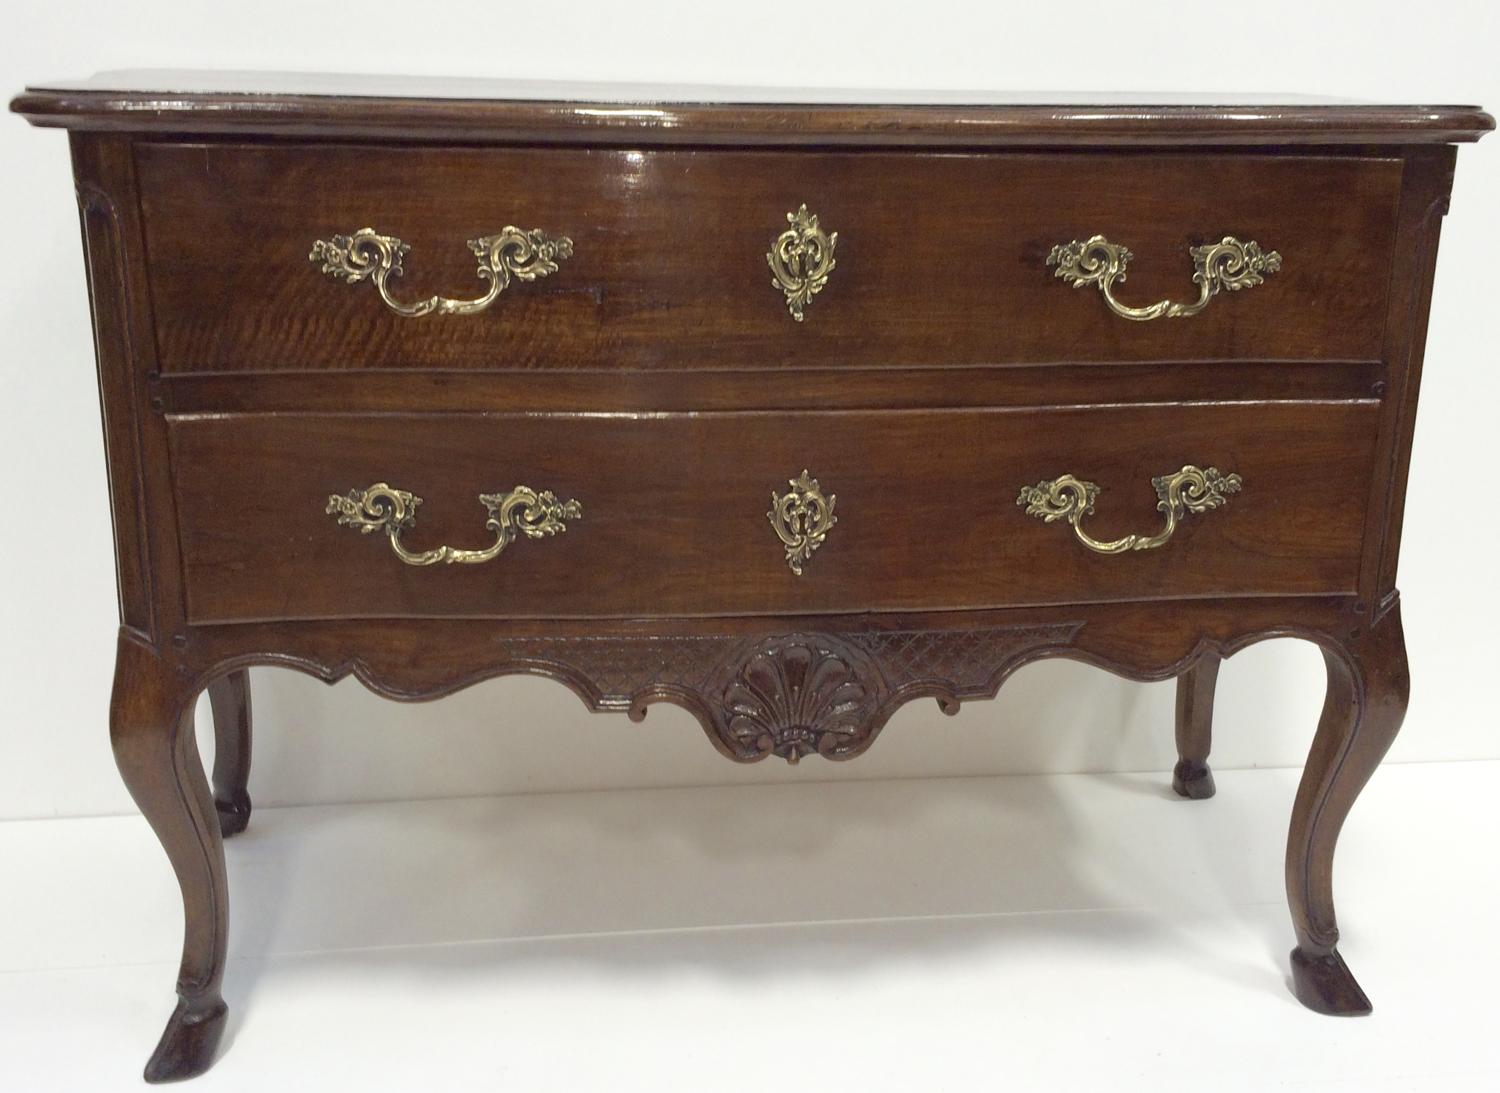 A FRENCH PROVINCIAL WALNUT COMMODE